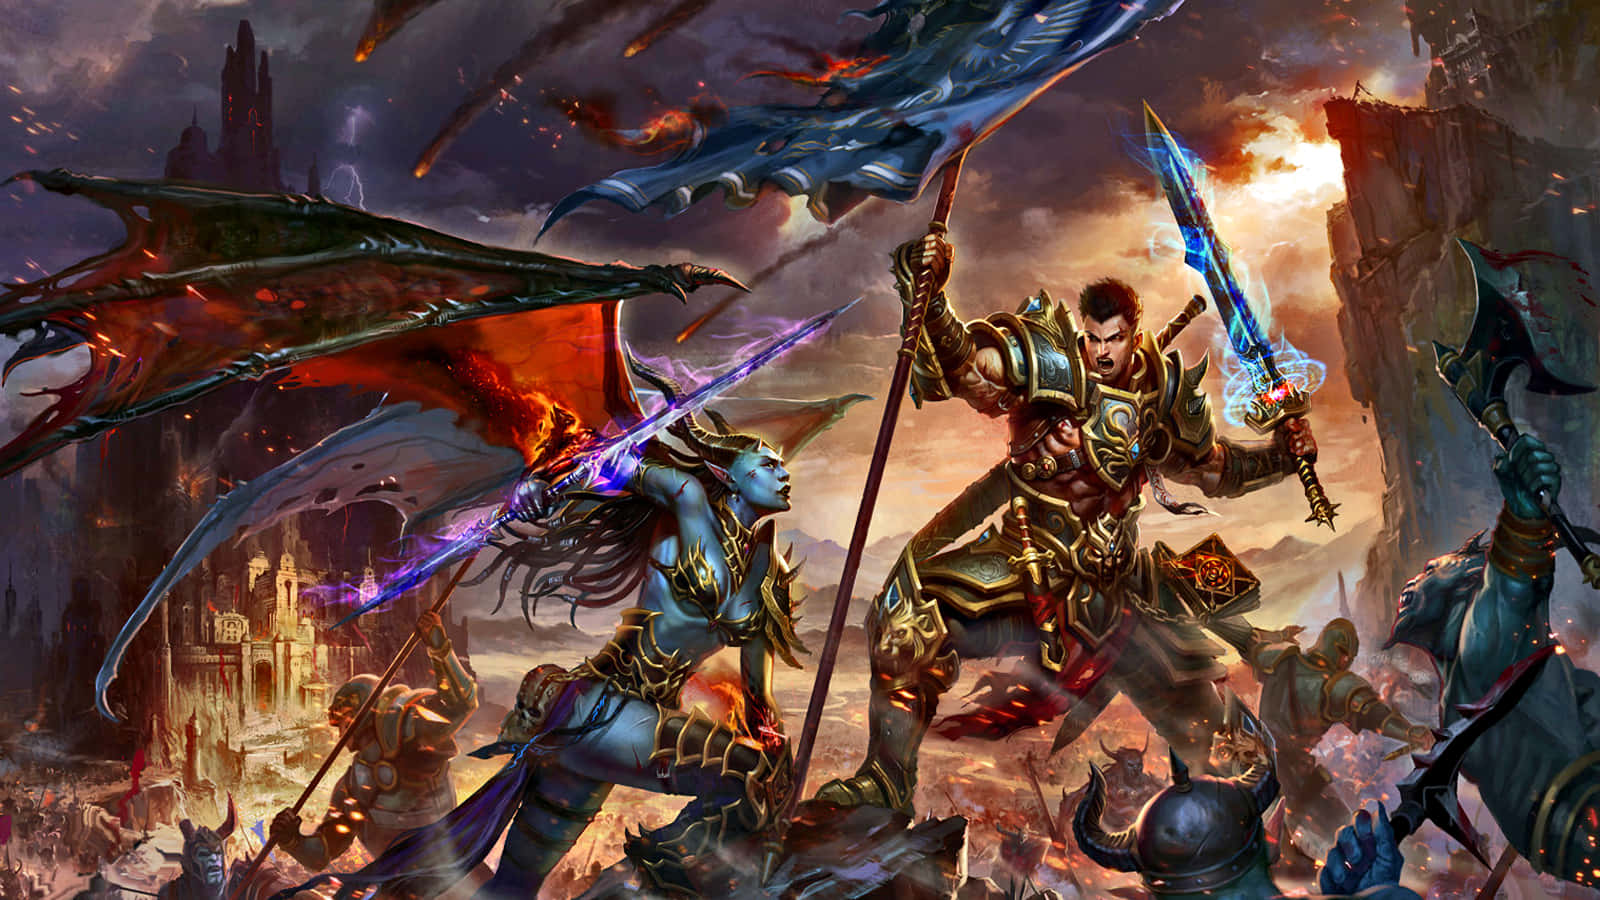 Two brave warriors locked in a duel to the death, the ultimate battle of good versus evil Wallpaper